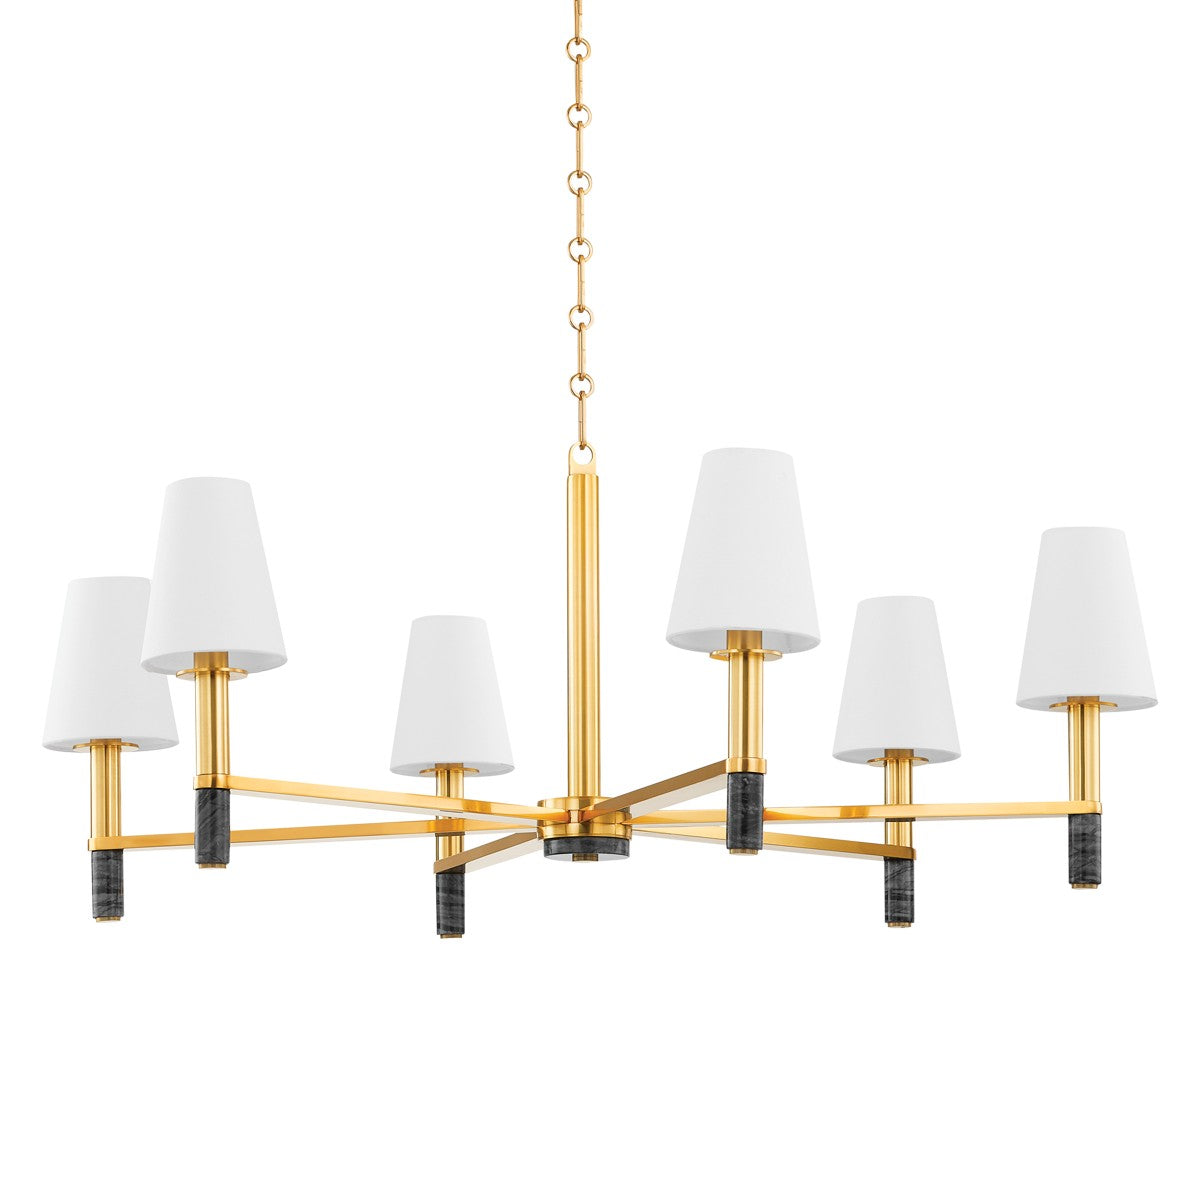 Hudson Valley Six Light Chandelier from the Montreal collection in Aged Brass finish